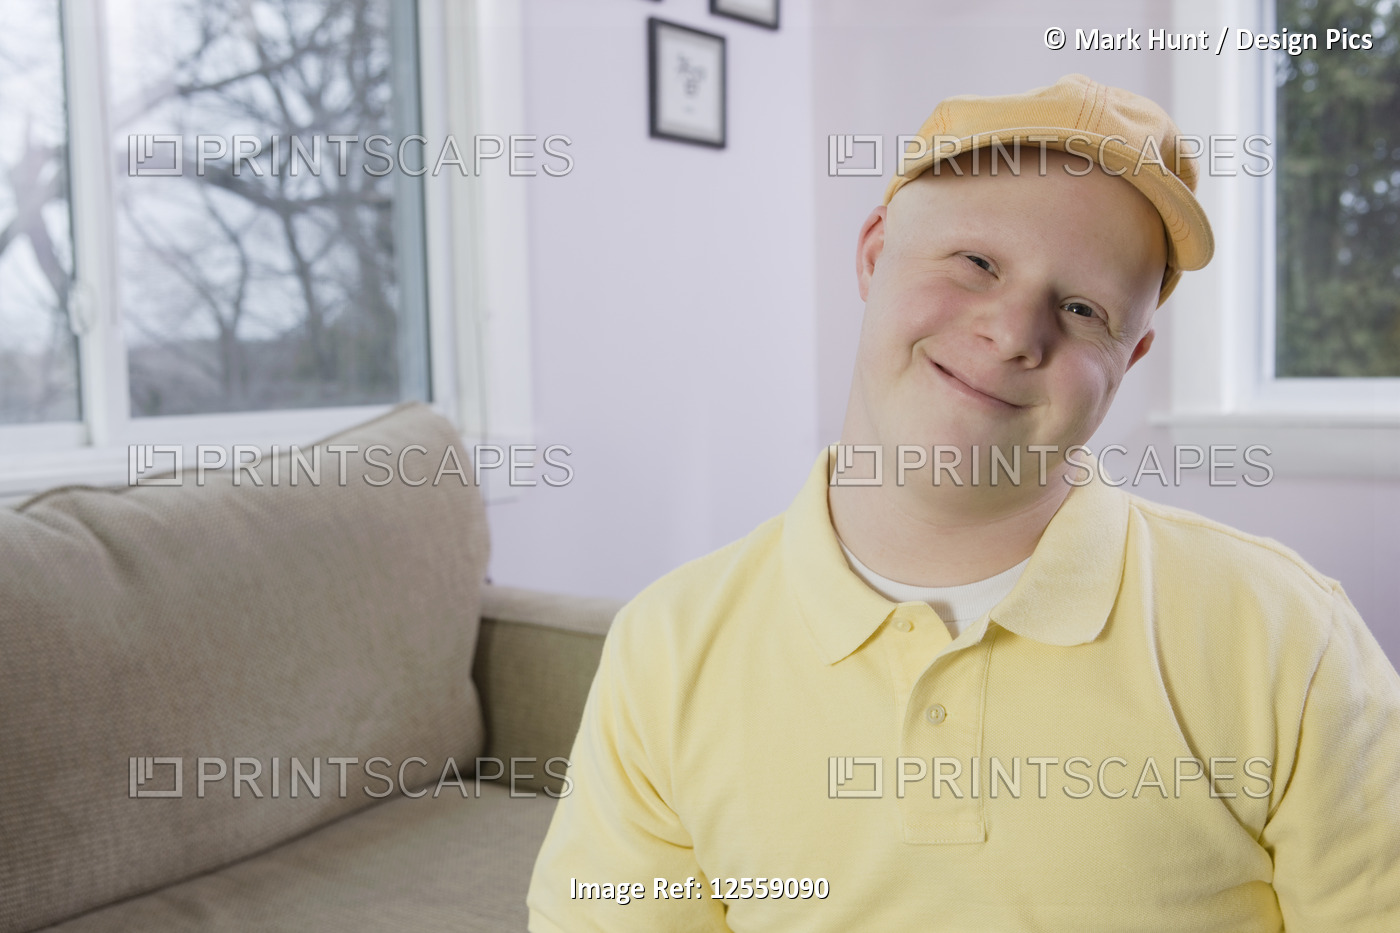 Portrait of a man with Down Syndrome smiling